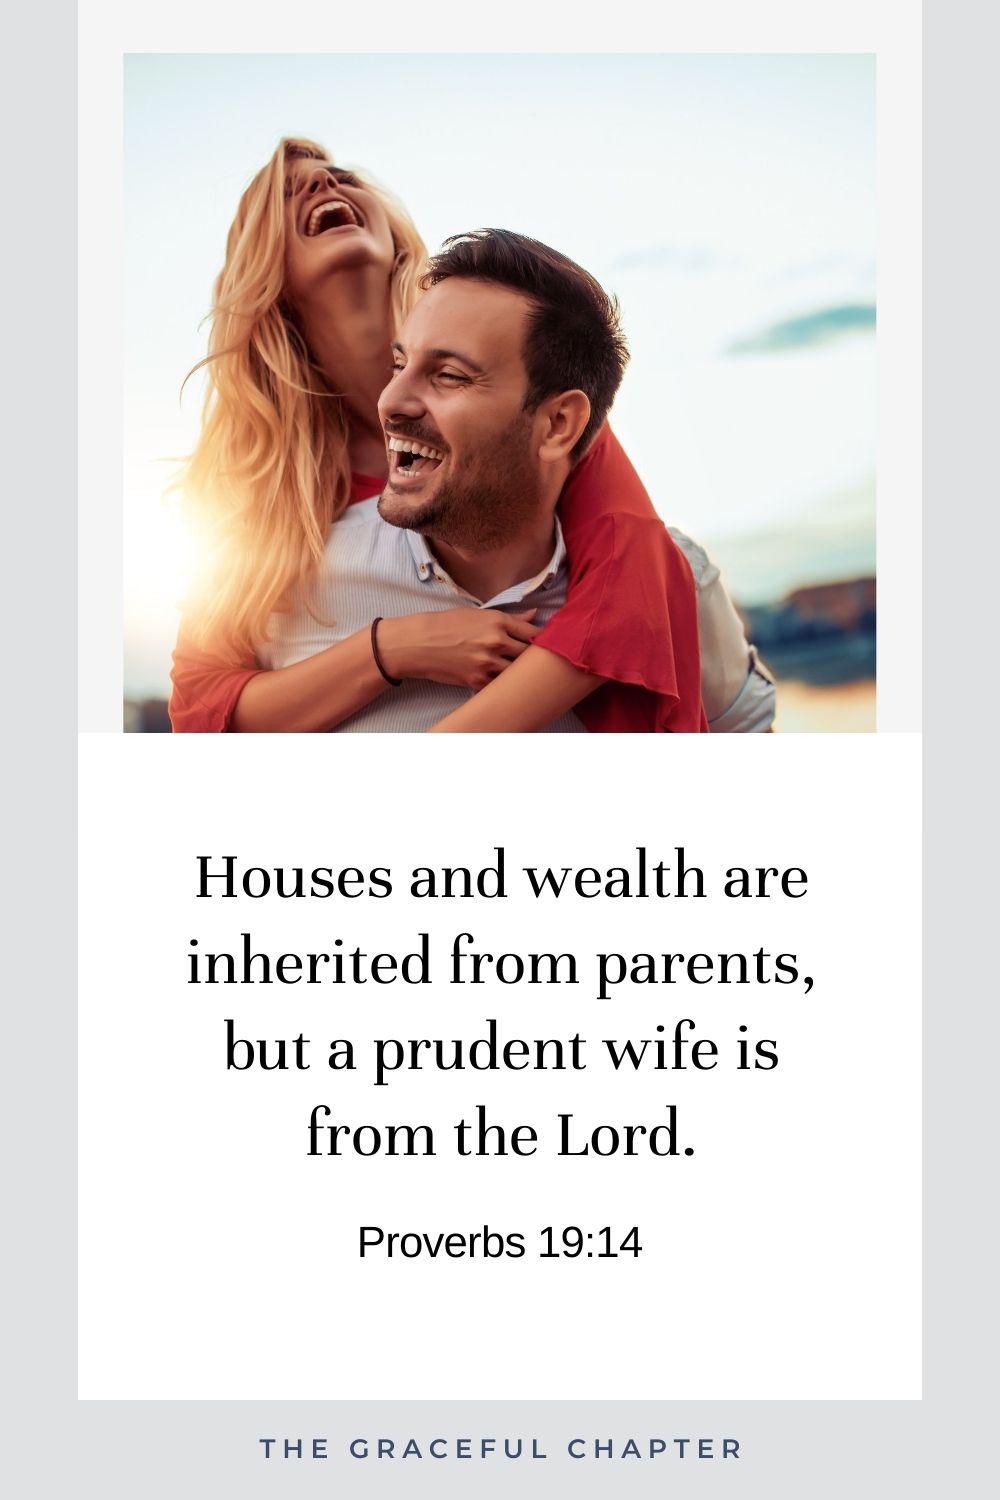 Houses and wealth are inherited from parents, but a prudent wife is from the Lord. Proverbs 19:14